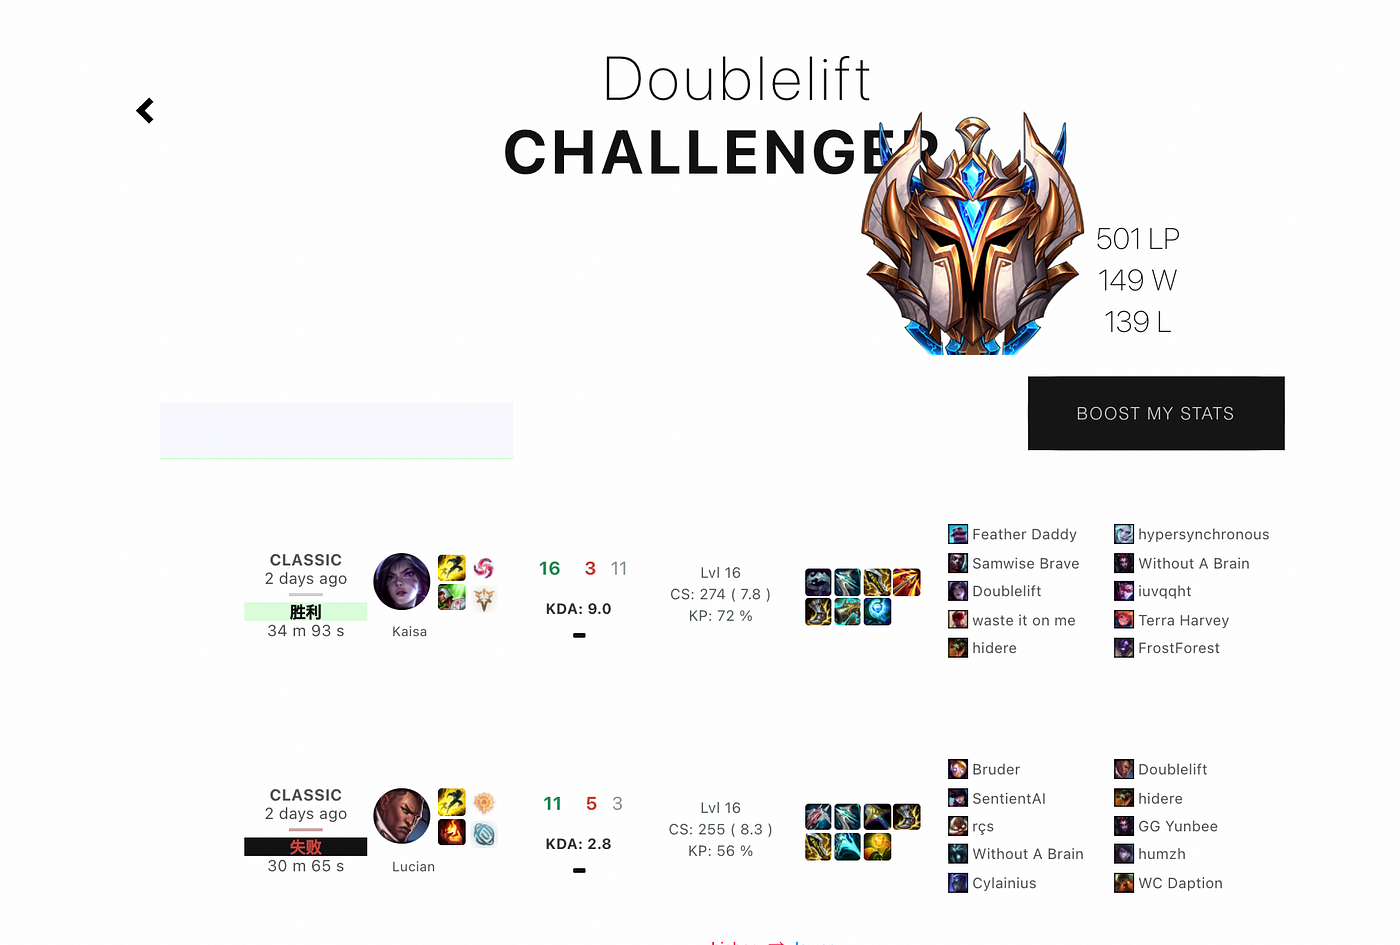 LOL BOOSTING UP TO CHALLENGER BY TOP 50 NORTH AMERICAN PLAYER